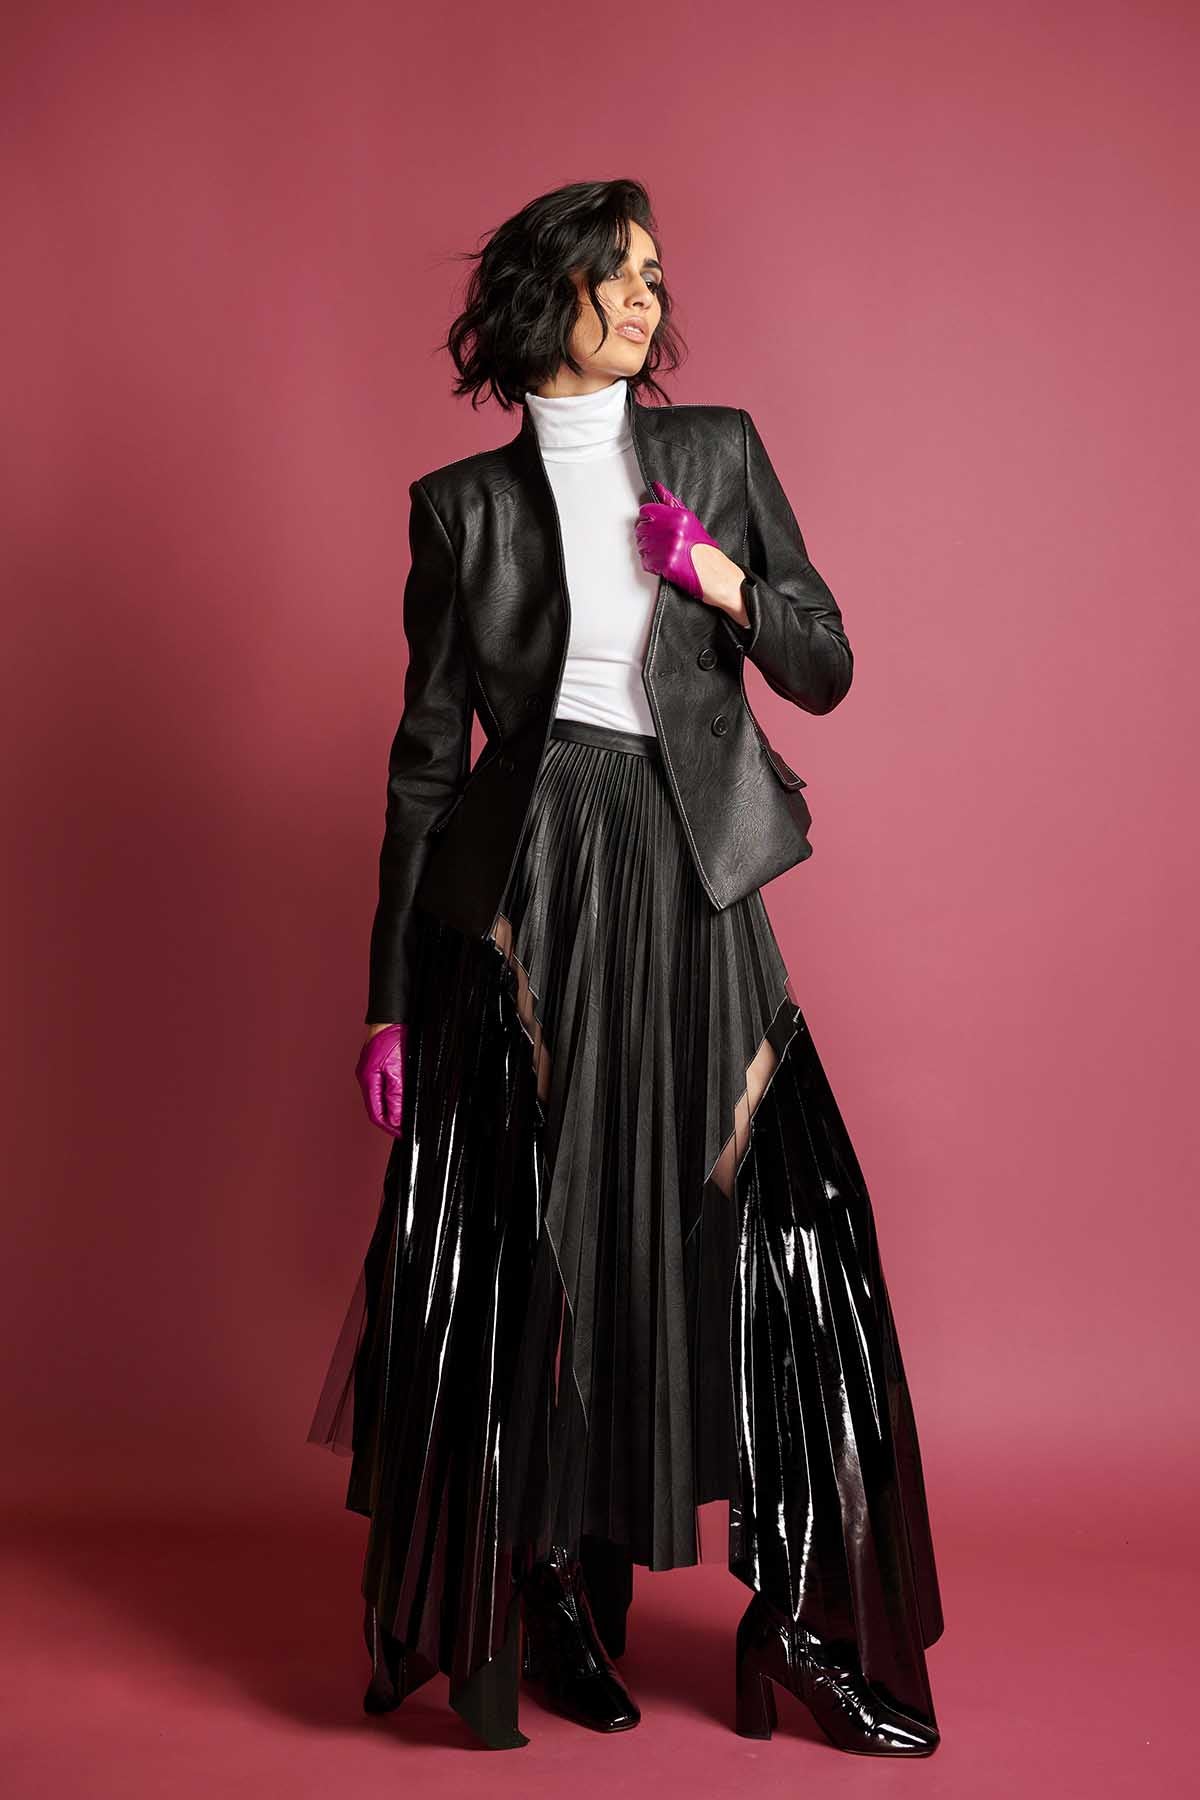 Onyx Vegan Leather, Patent and Tulle Pleated Skirt